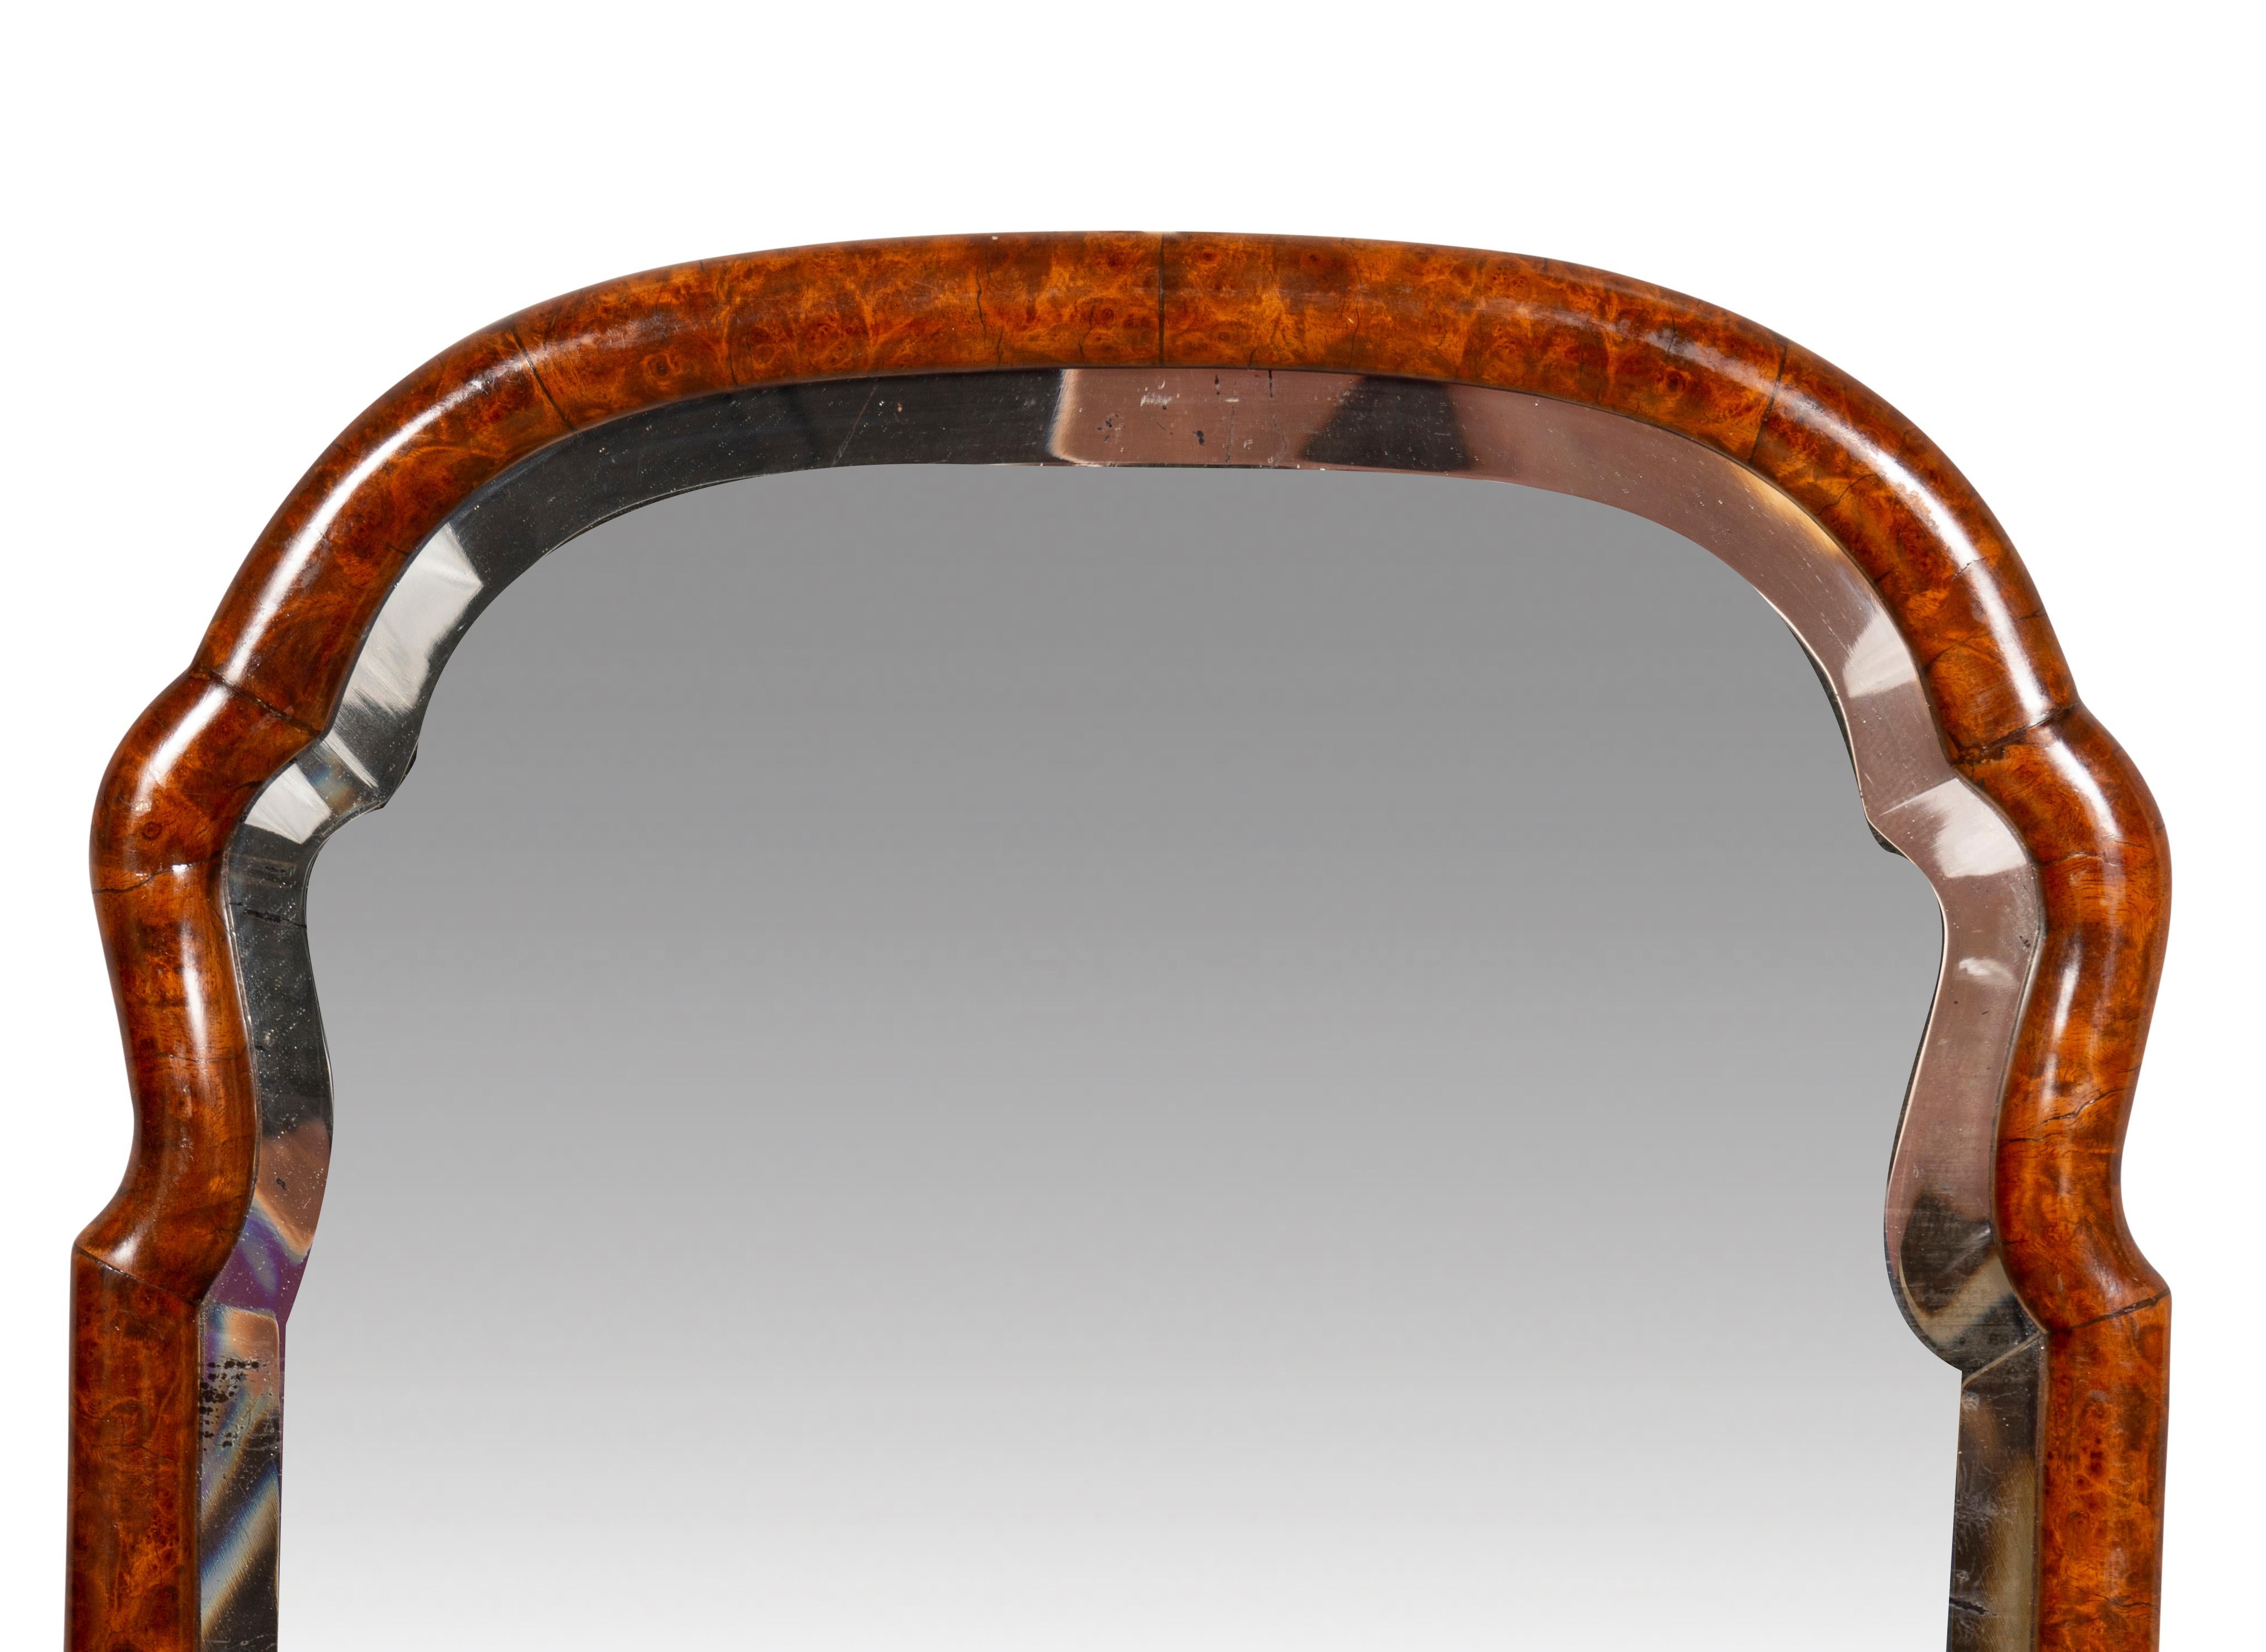 Arched beveled mirror plate set in a conforming burl walnut frame.